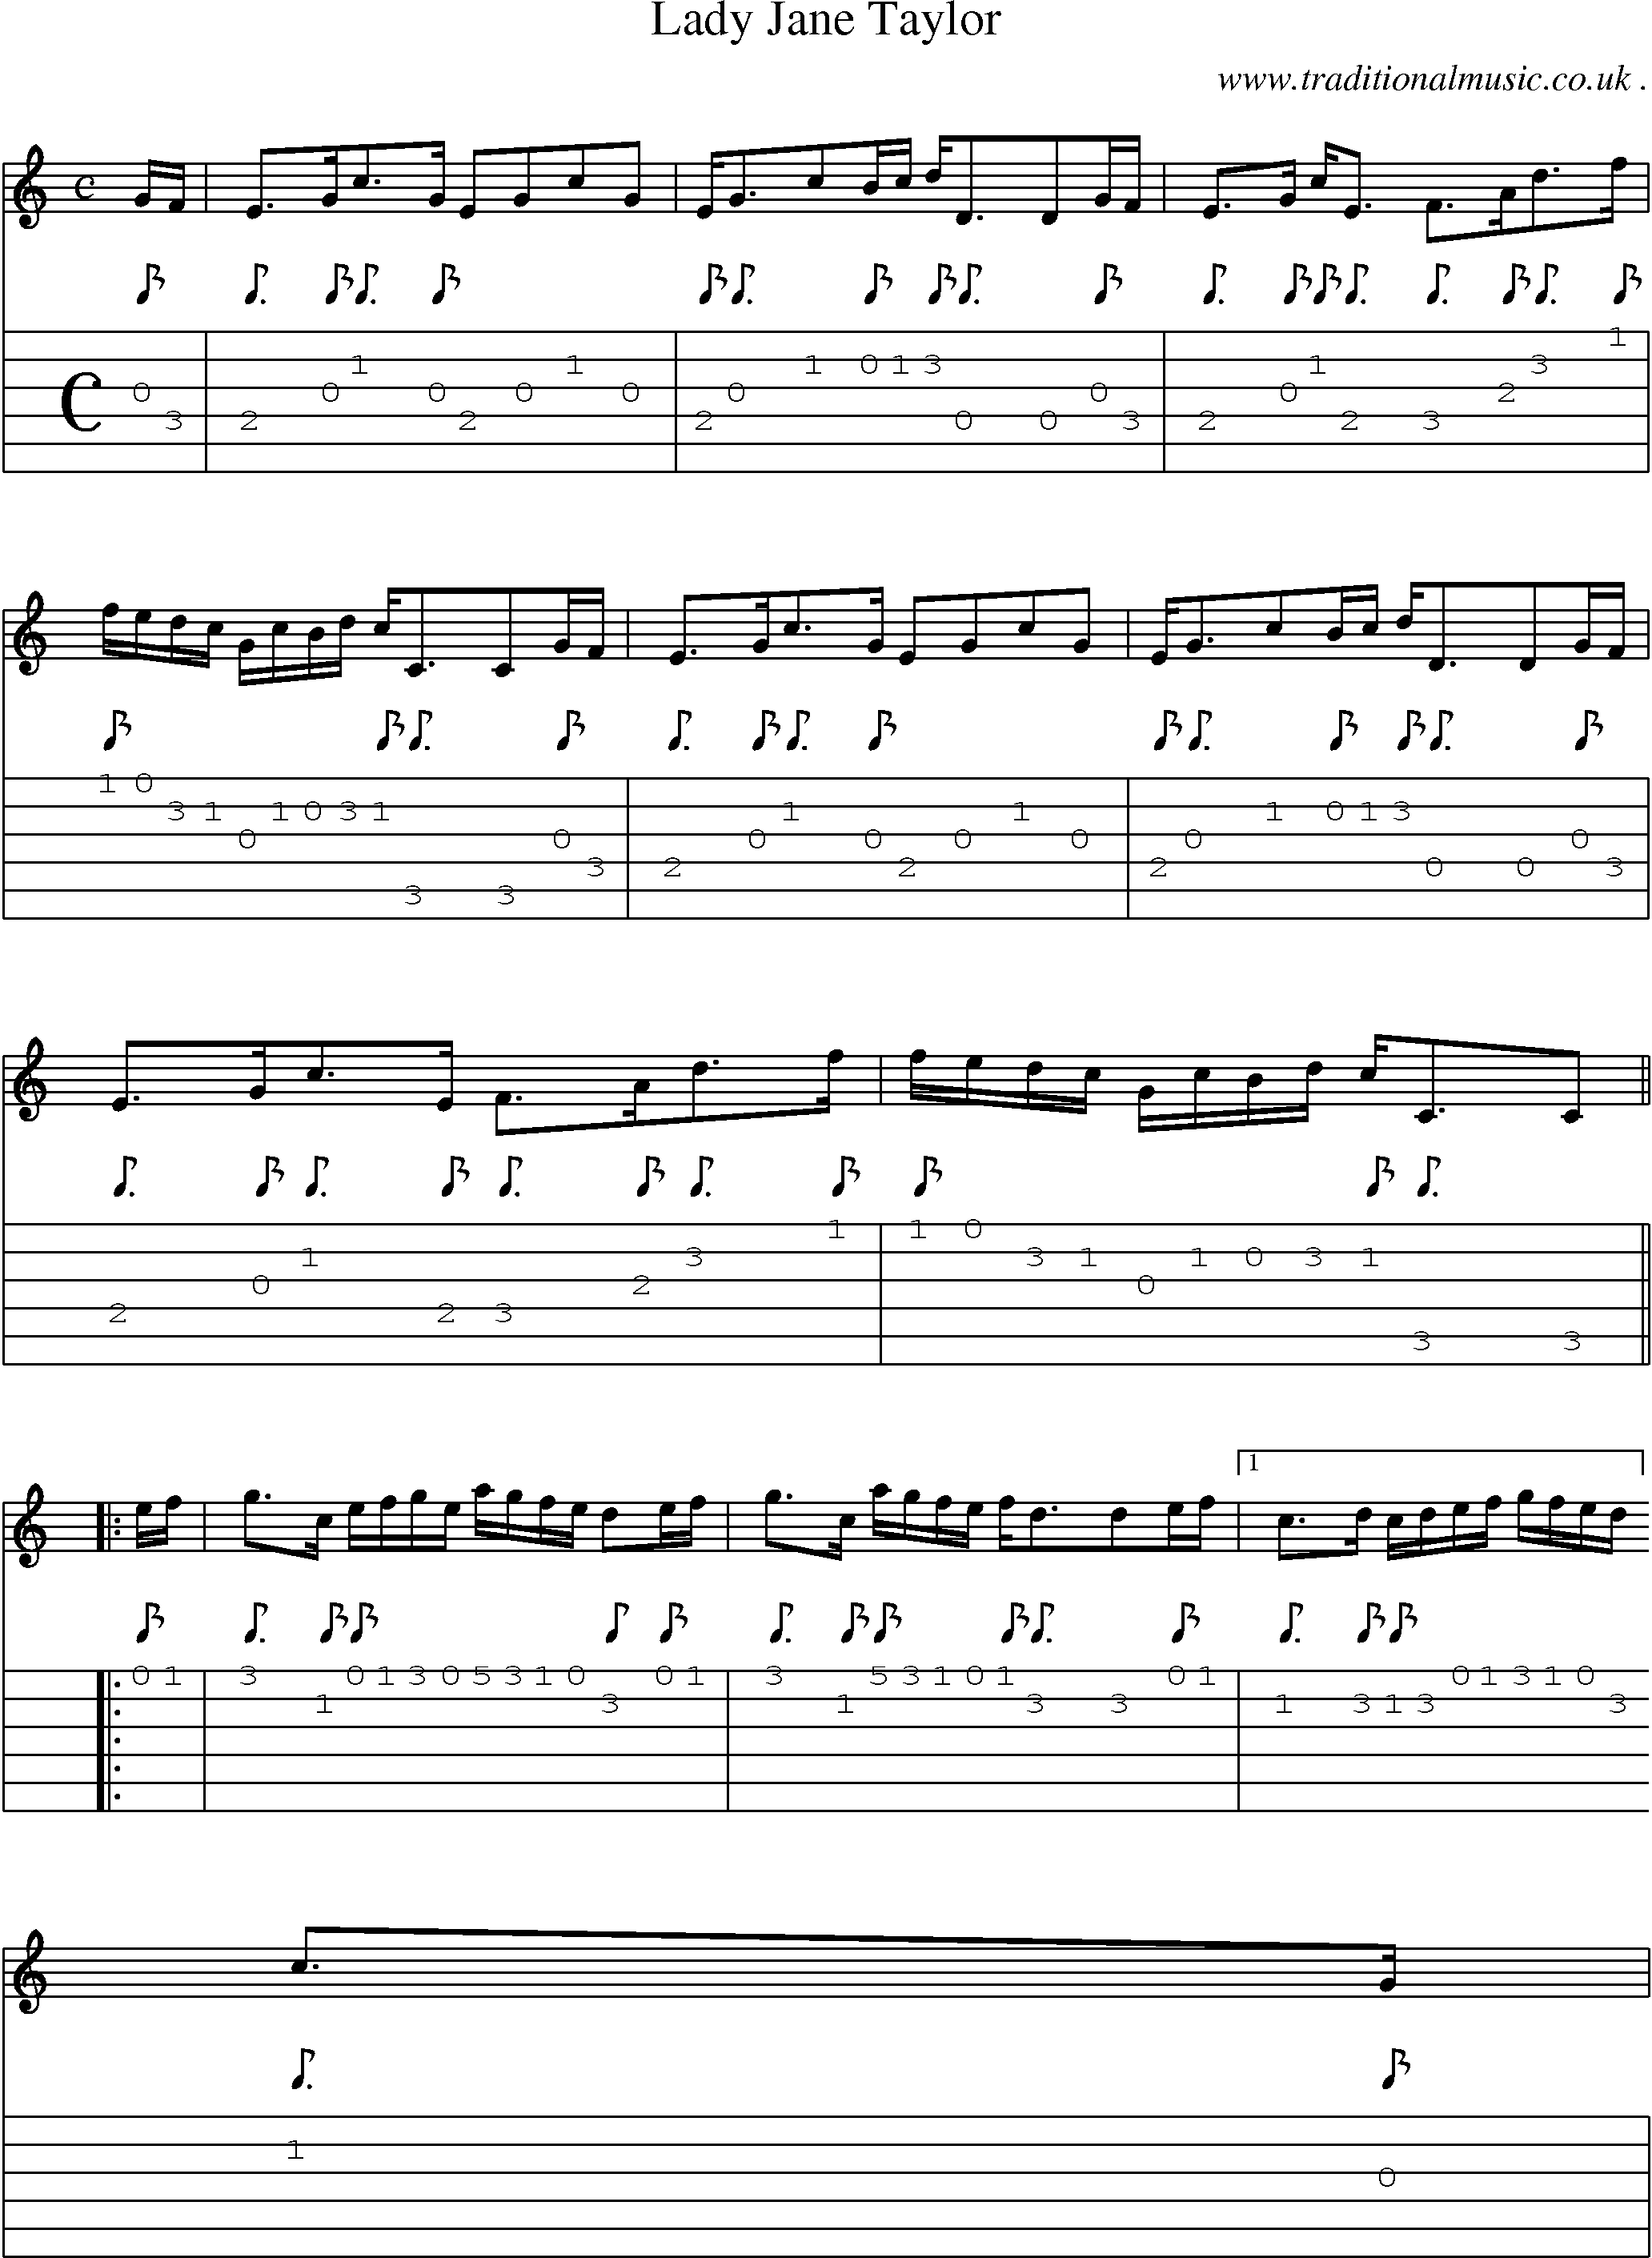 Sheet-music  score, Chords and Guitar Tabs for Lady Jane Taylor